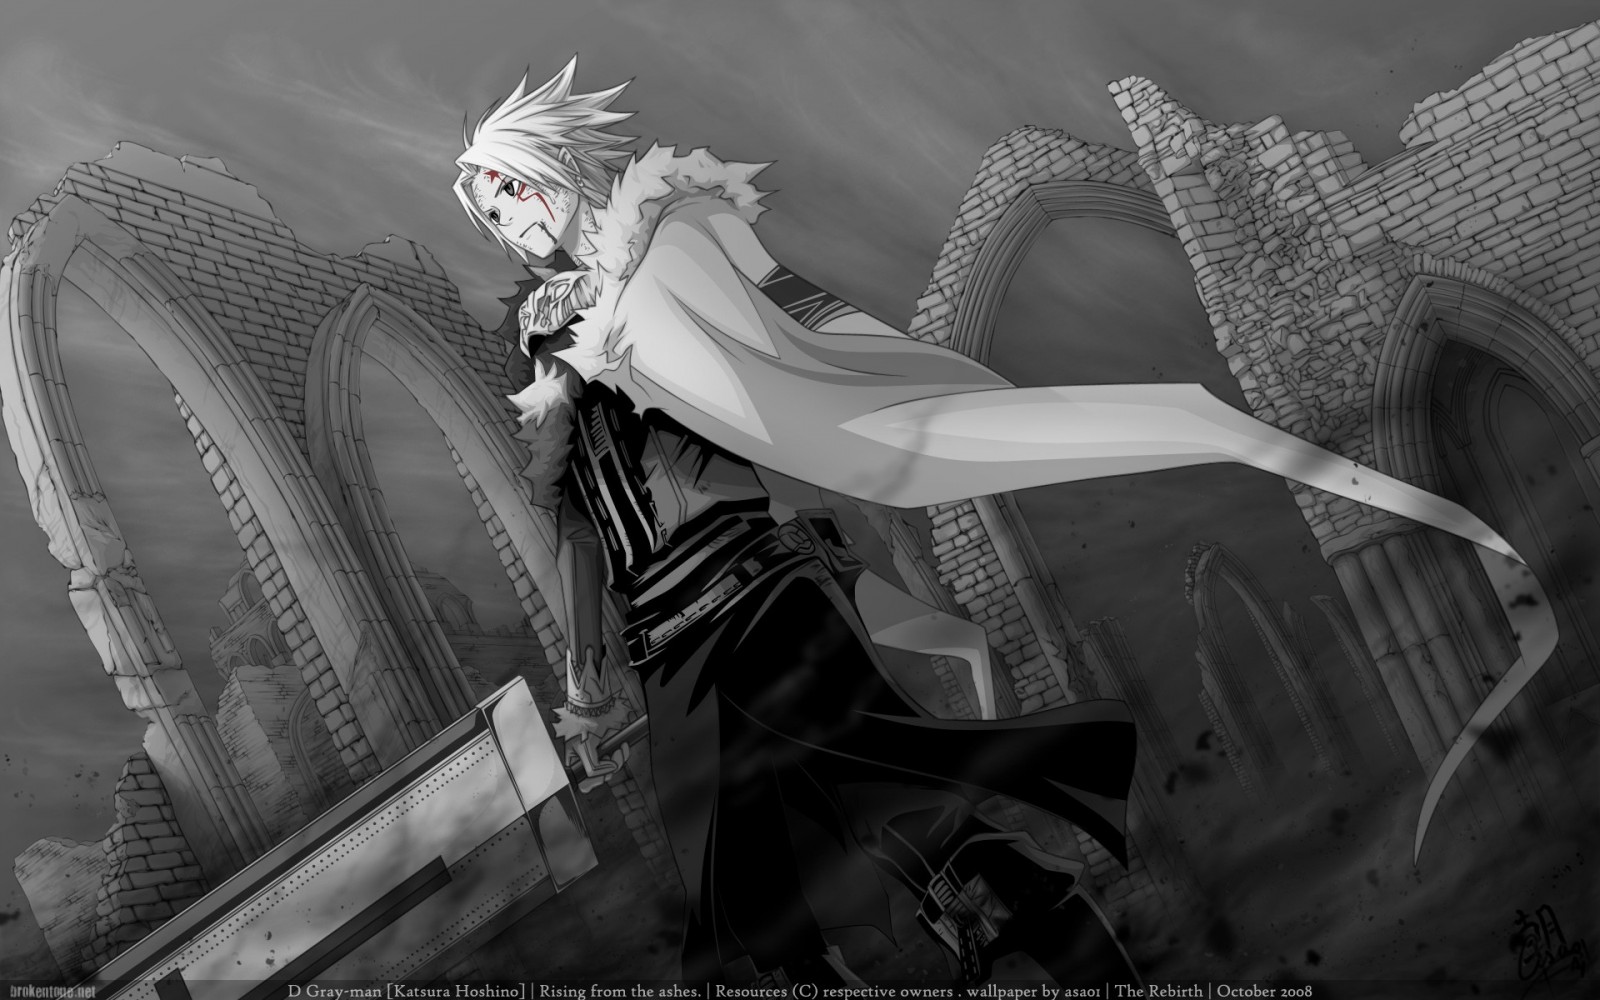 Anime Boy Black And White Wallpapers